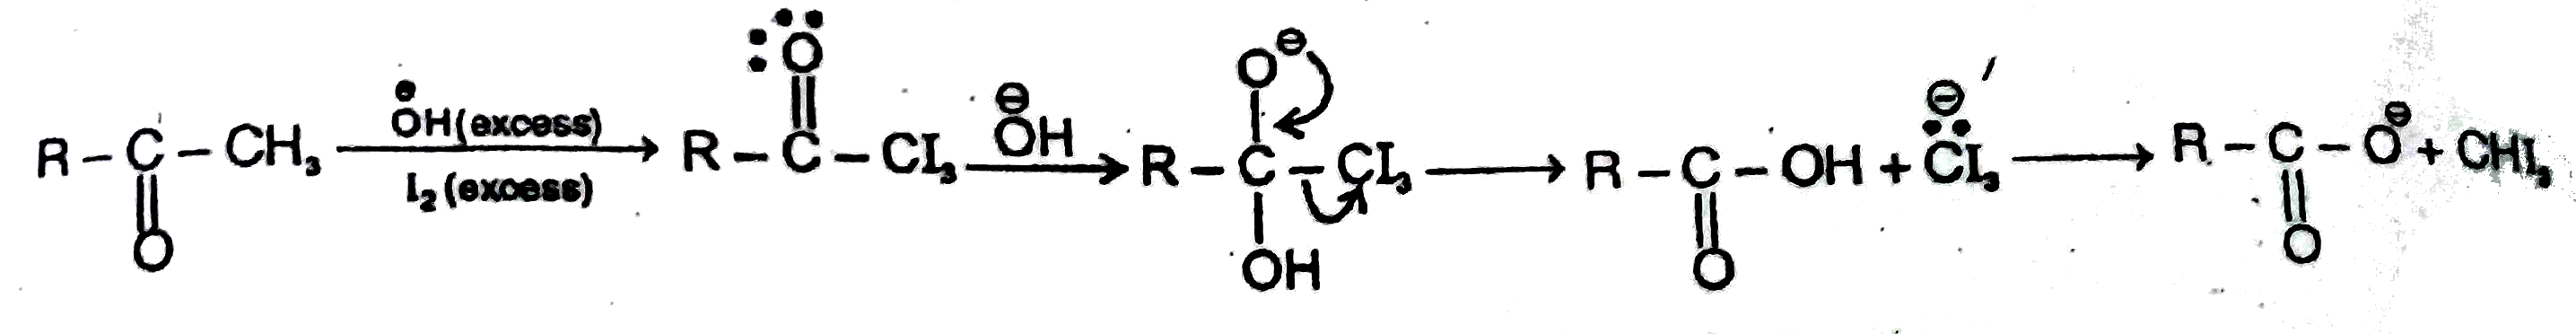 In the presence of excess base and excess halogen a methylketone is converted first into a trihalo substituted ketone and then into a carboxylic acid.After the trihalo substituted ketone is formed hydroxide ion attacks the carboxyl carbon because the trihalo methyl ion is the group more easily expelled from the tetrahedral intermediate.The conversion of a methyl ketone to a carboxylic acid is called a haloform reaction because one of the product is haloform (CHCl3) or CHI3 or CHBr3.      Ph-undersetunderset(O)(||)C-undersetunderset(Me)(|)oversetoverset(Et)(|)C-undersetunderset(O)(||)C-CH3undersetunderset((3)Delta)((2)H^(o+))overset((1)I2//OH^(o+))to Product is